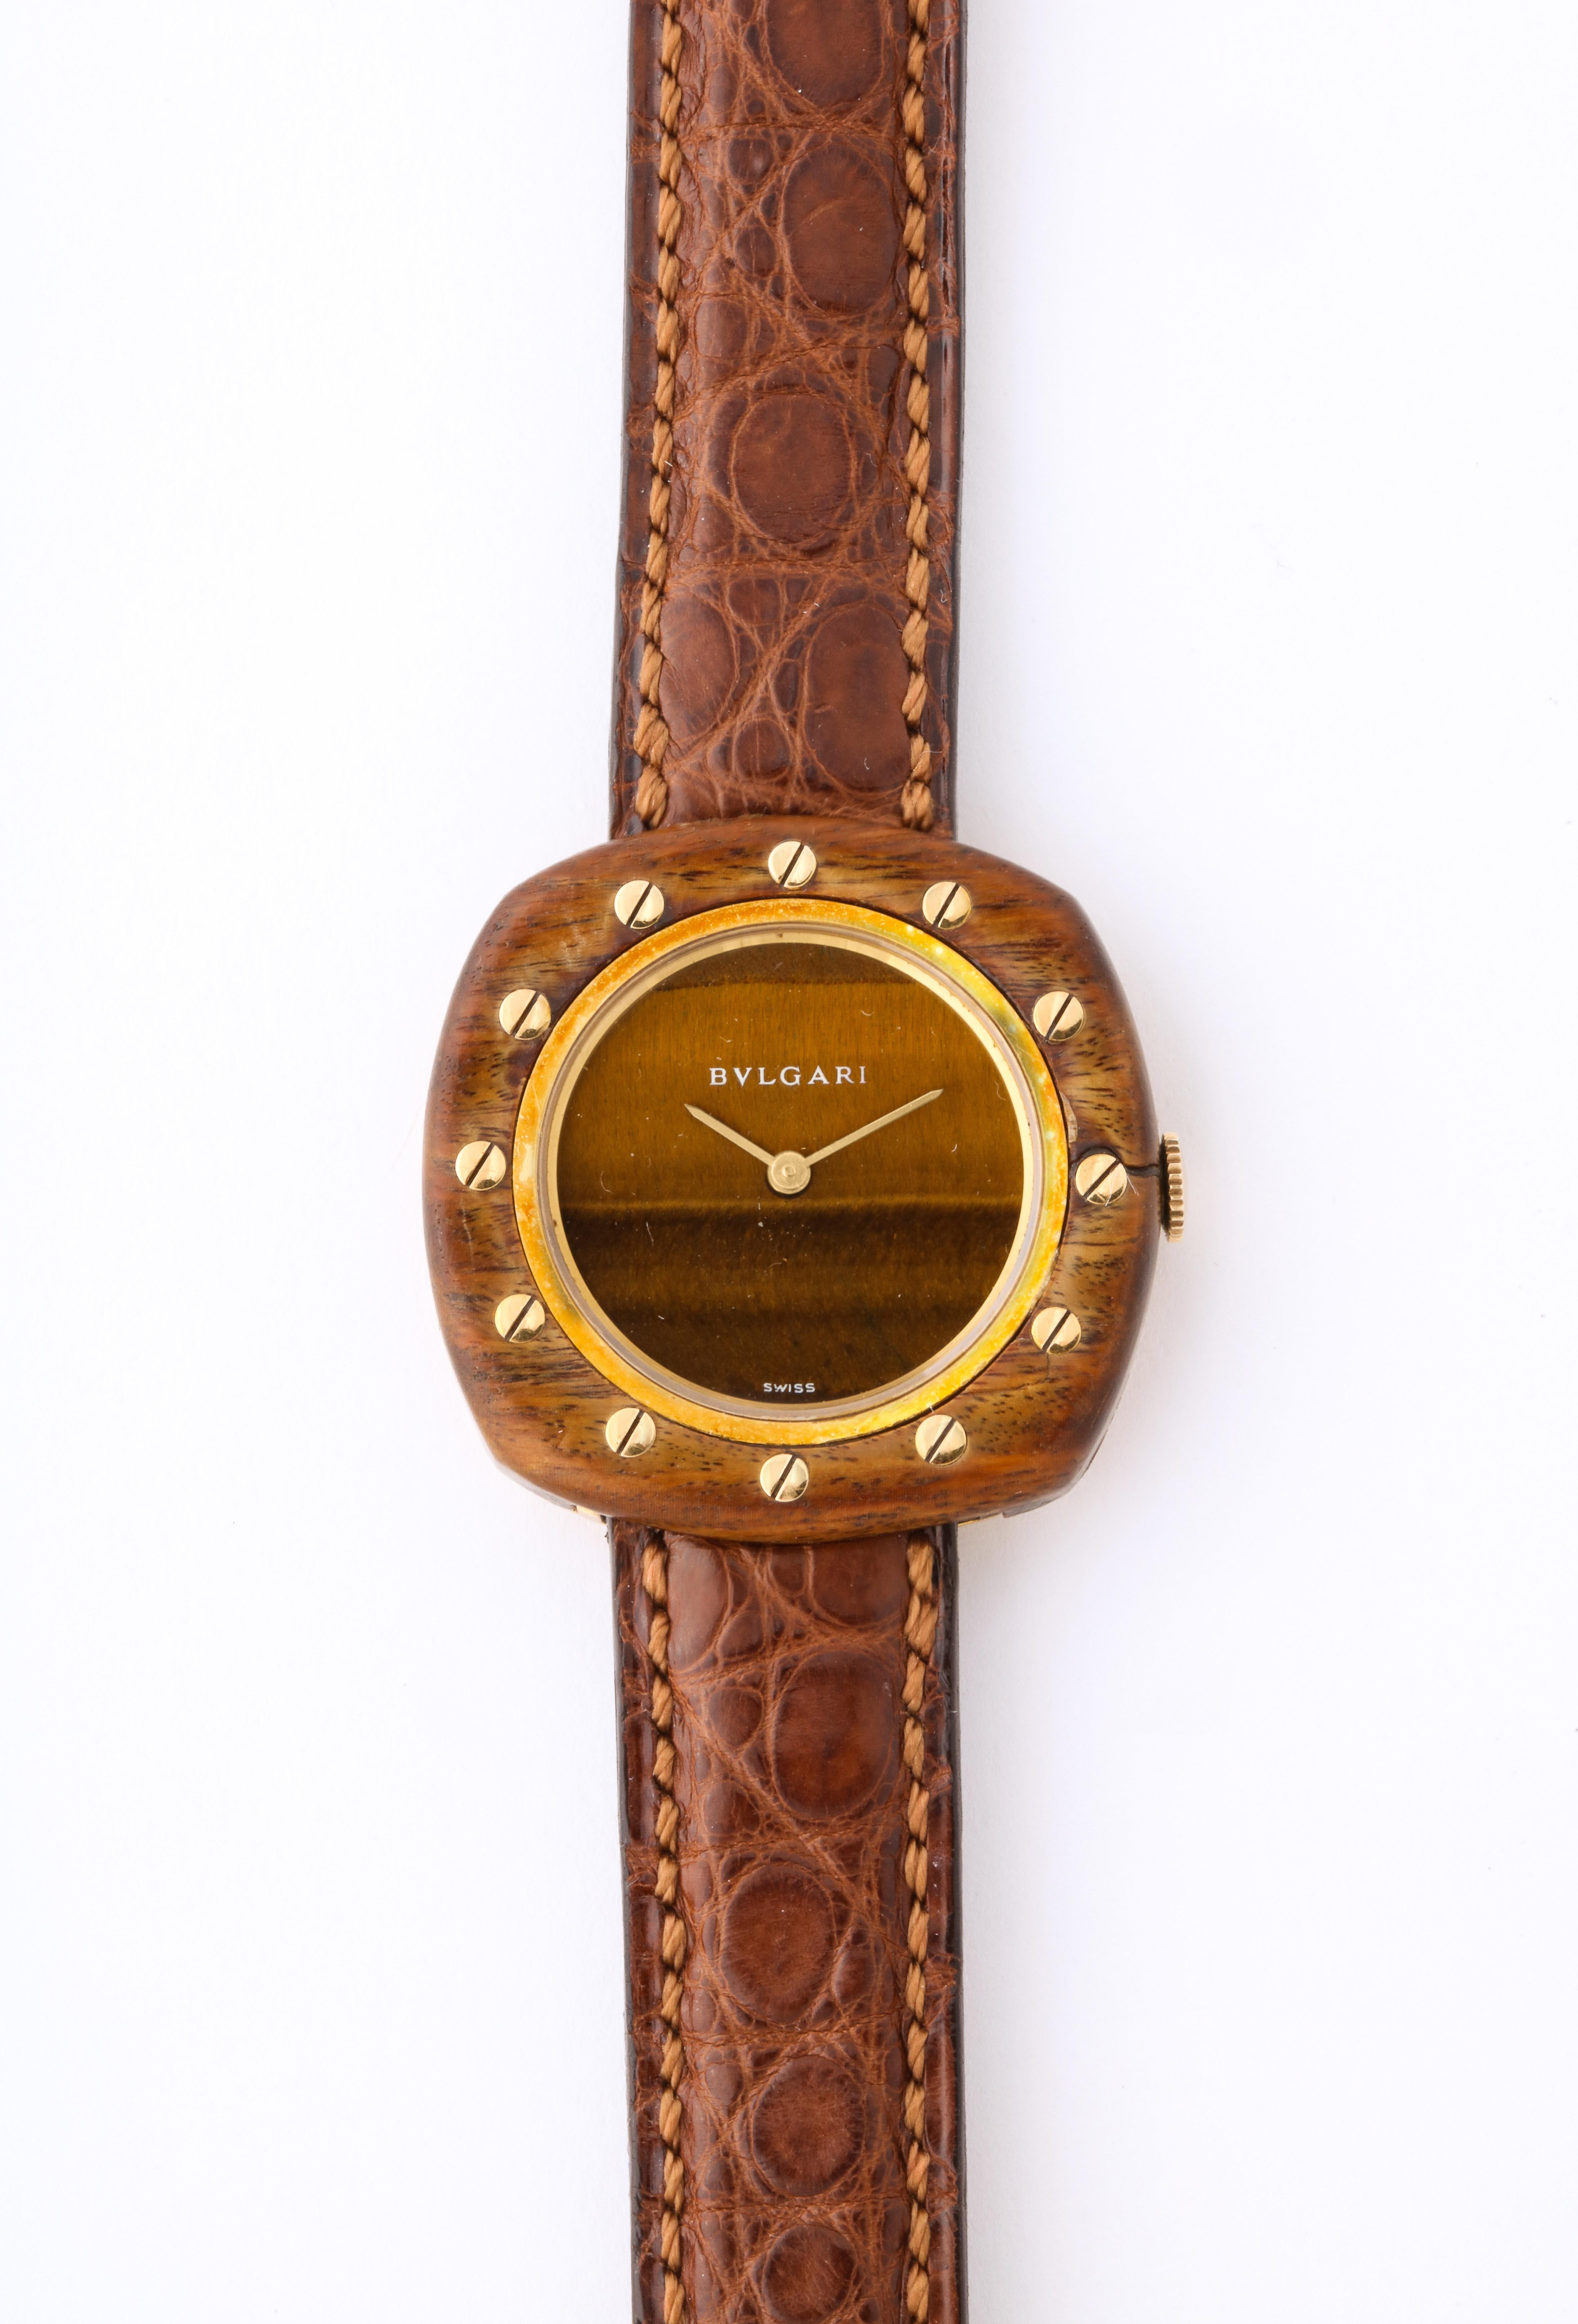 Vintage Bulgari 18K Gold and Wood Wristwatch, circa 1970.

Very unusual design with gold screws, original brown crocodile strap, marked BVLGARI.

Swiss made. Marked BVLGARI 750 to the buckle on the strap. Hallmarks and numbers to the case.  

7.5